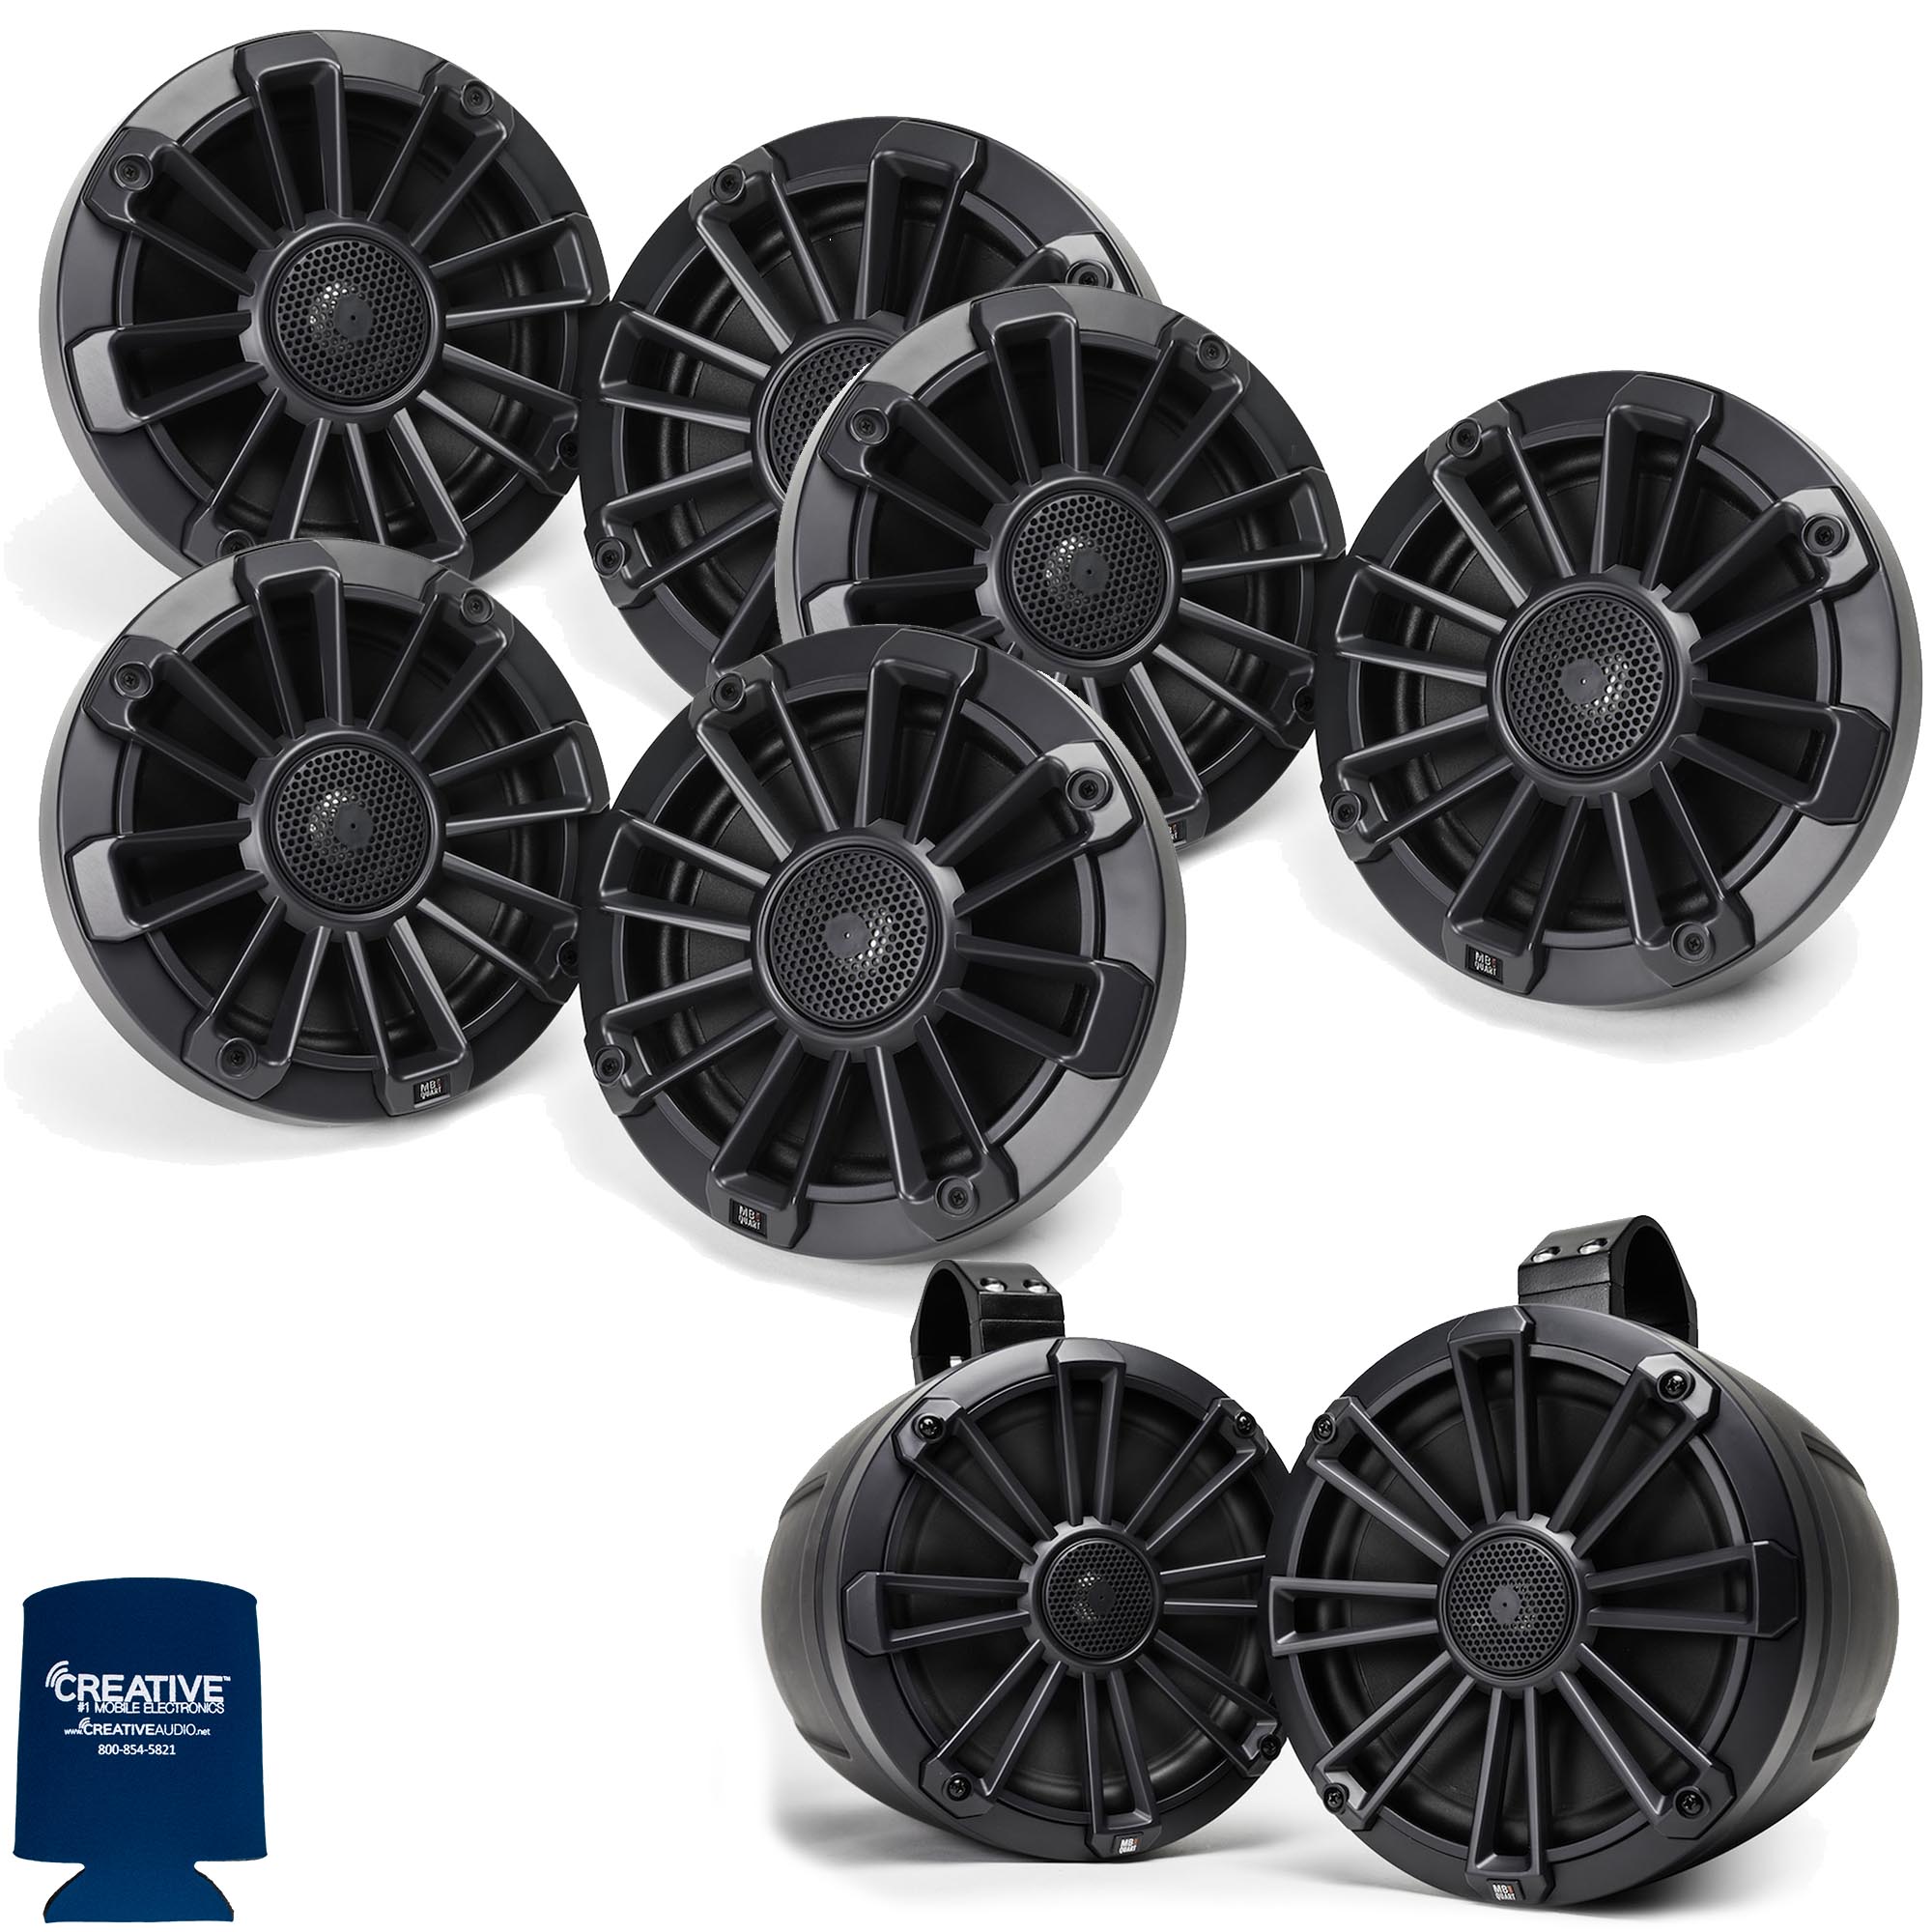 MB Quart Bundle- 3 Pair NP1-116 Premium Waterproof 6.5 Inch Marine Speakers with 1 Pair NPT1-120 8" Tower Speakers Premium Marine Speakers (Black Frame with Black, Silver and White Grills Included) - image 1 of 7